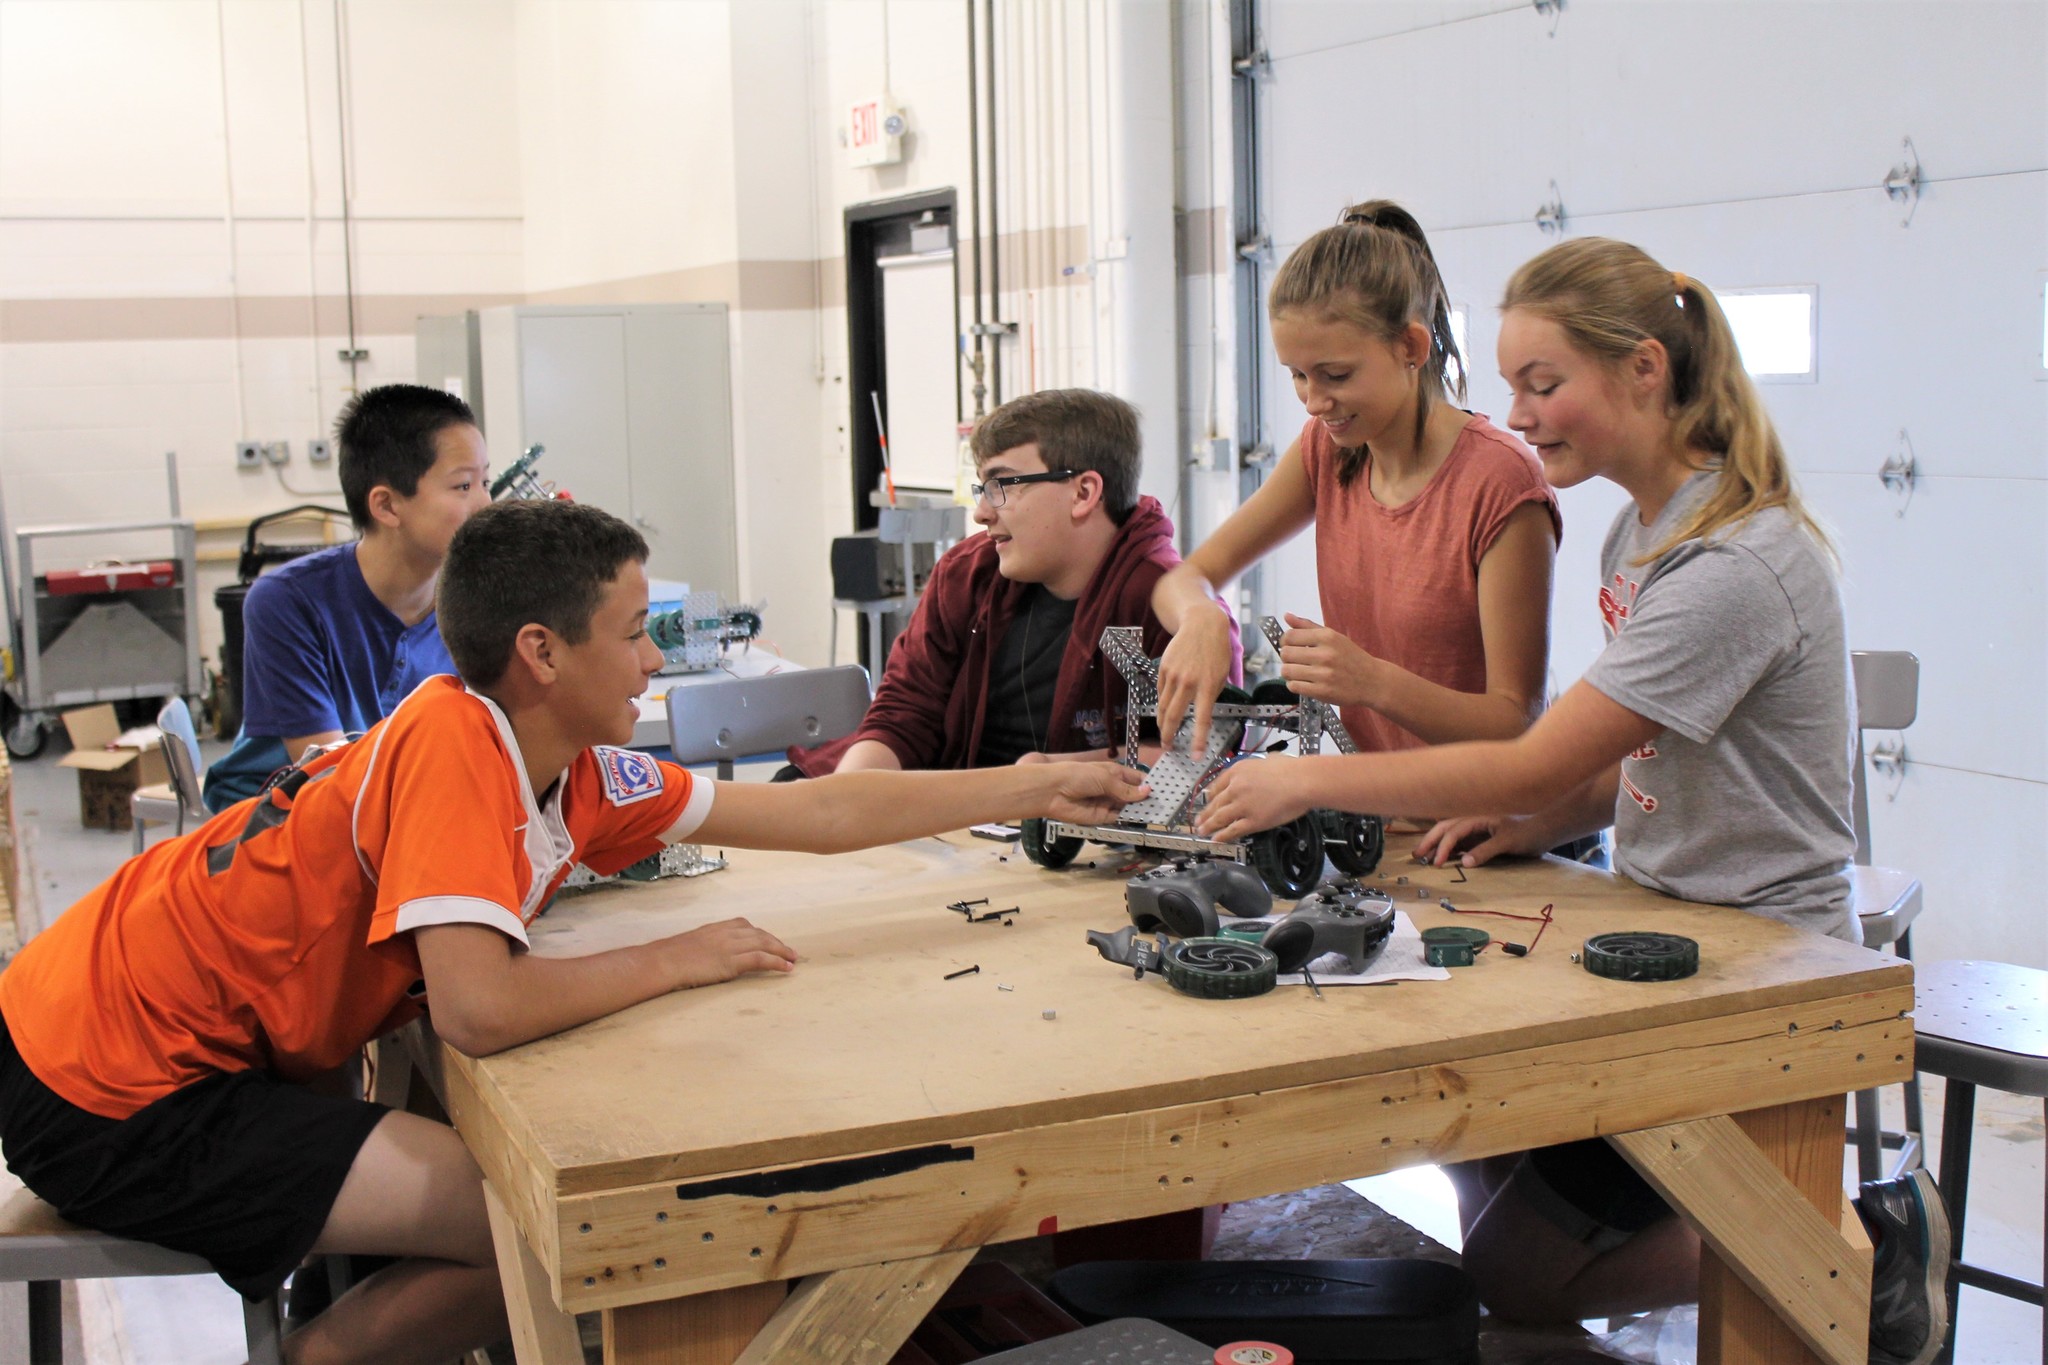 Camp students building robot